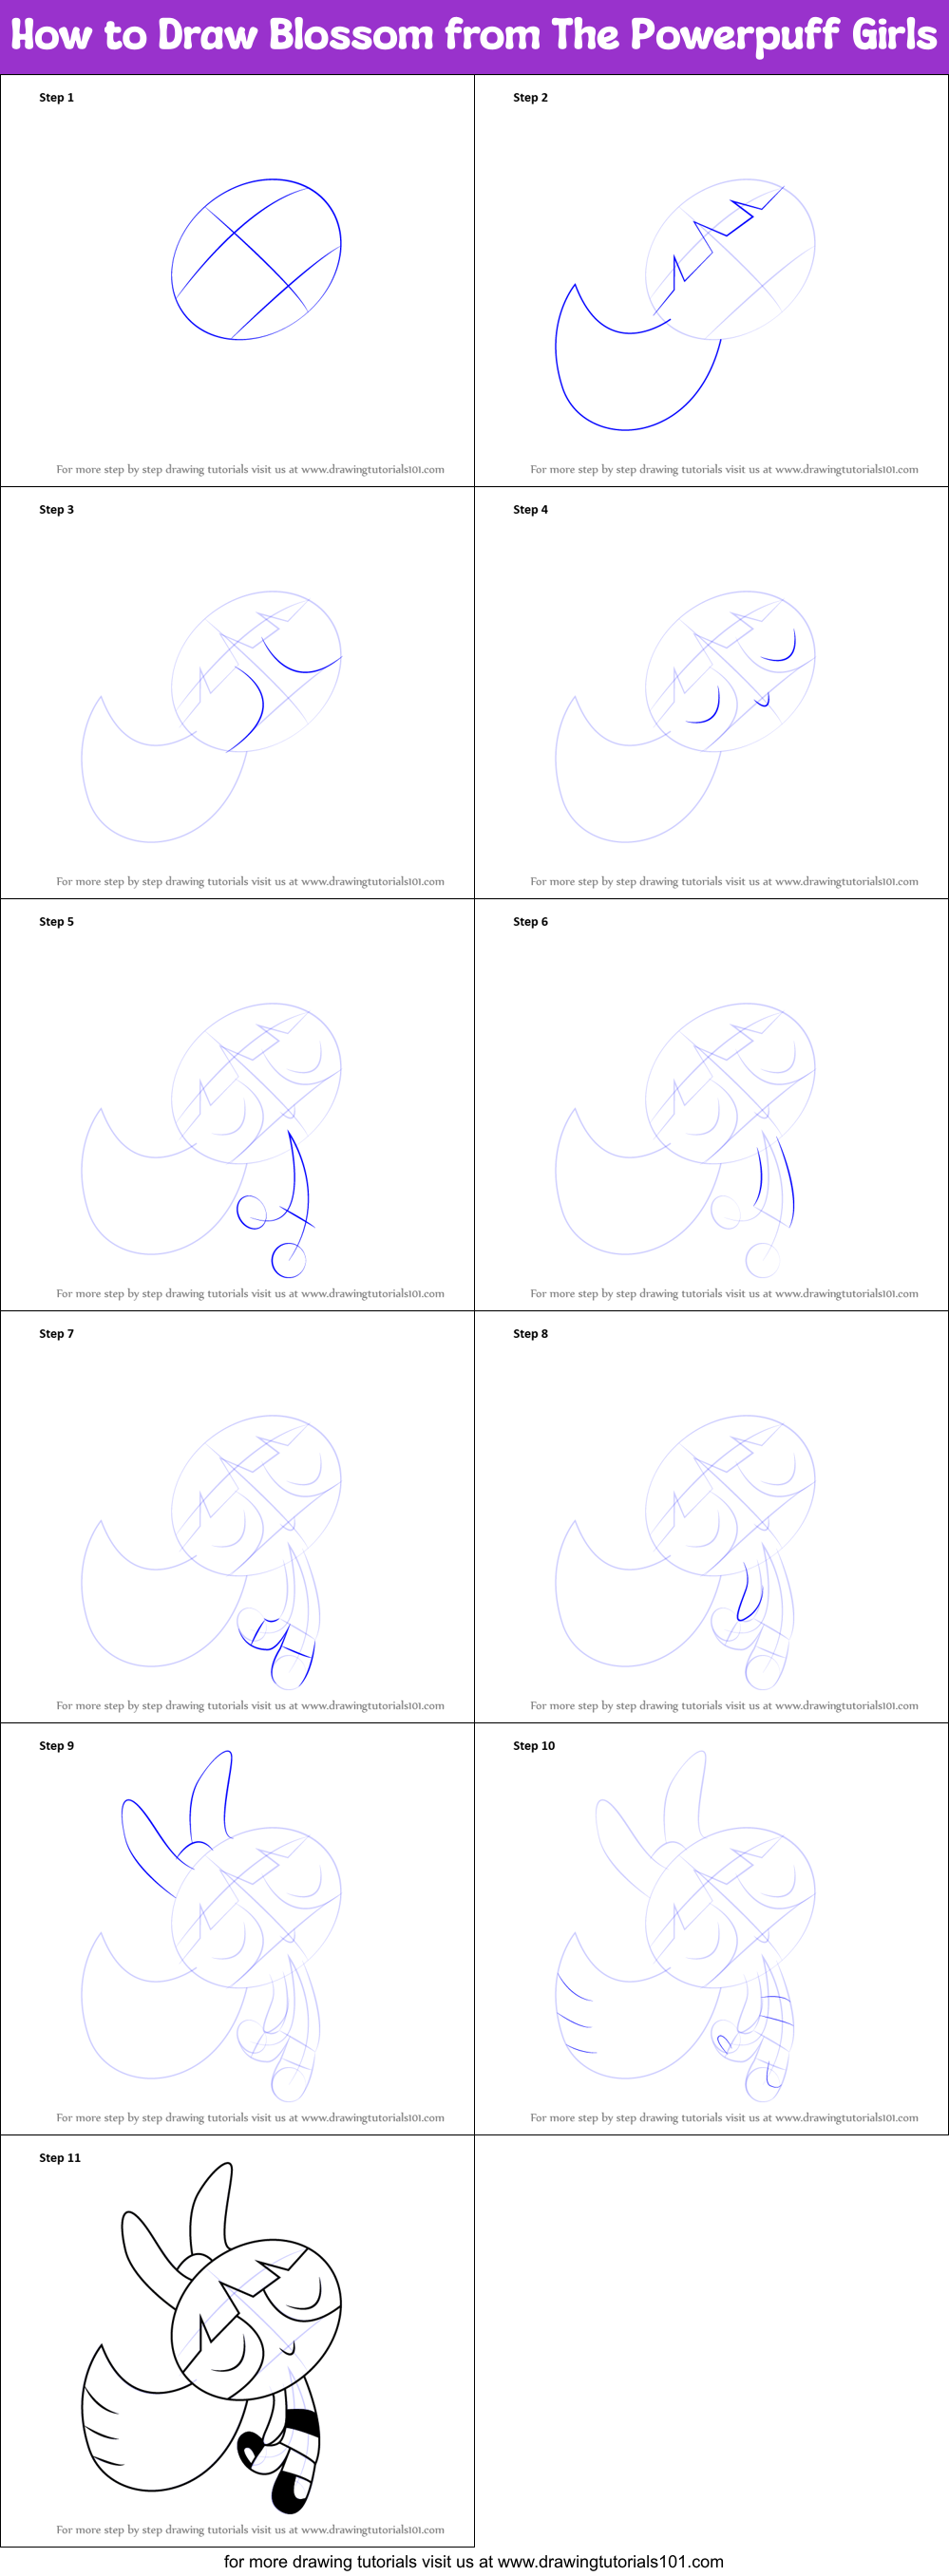  How To Draw Blossom Powerpuff Step By Step in the world Learn more here 